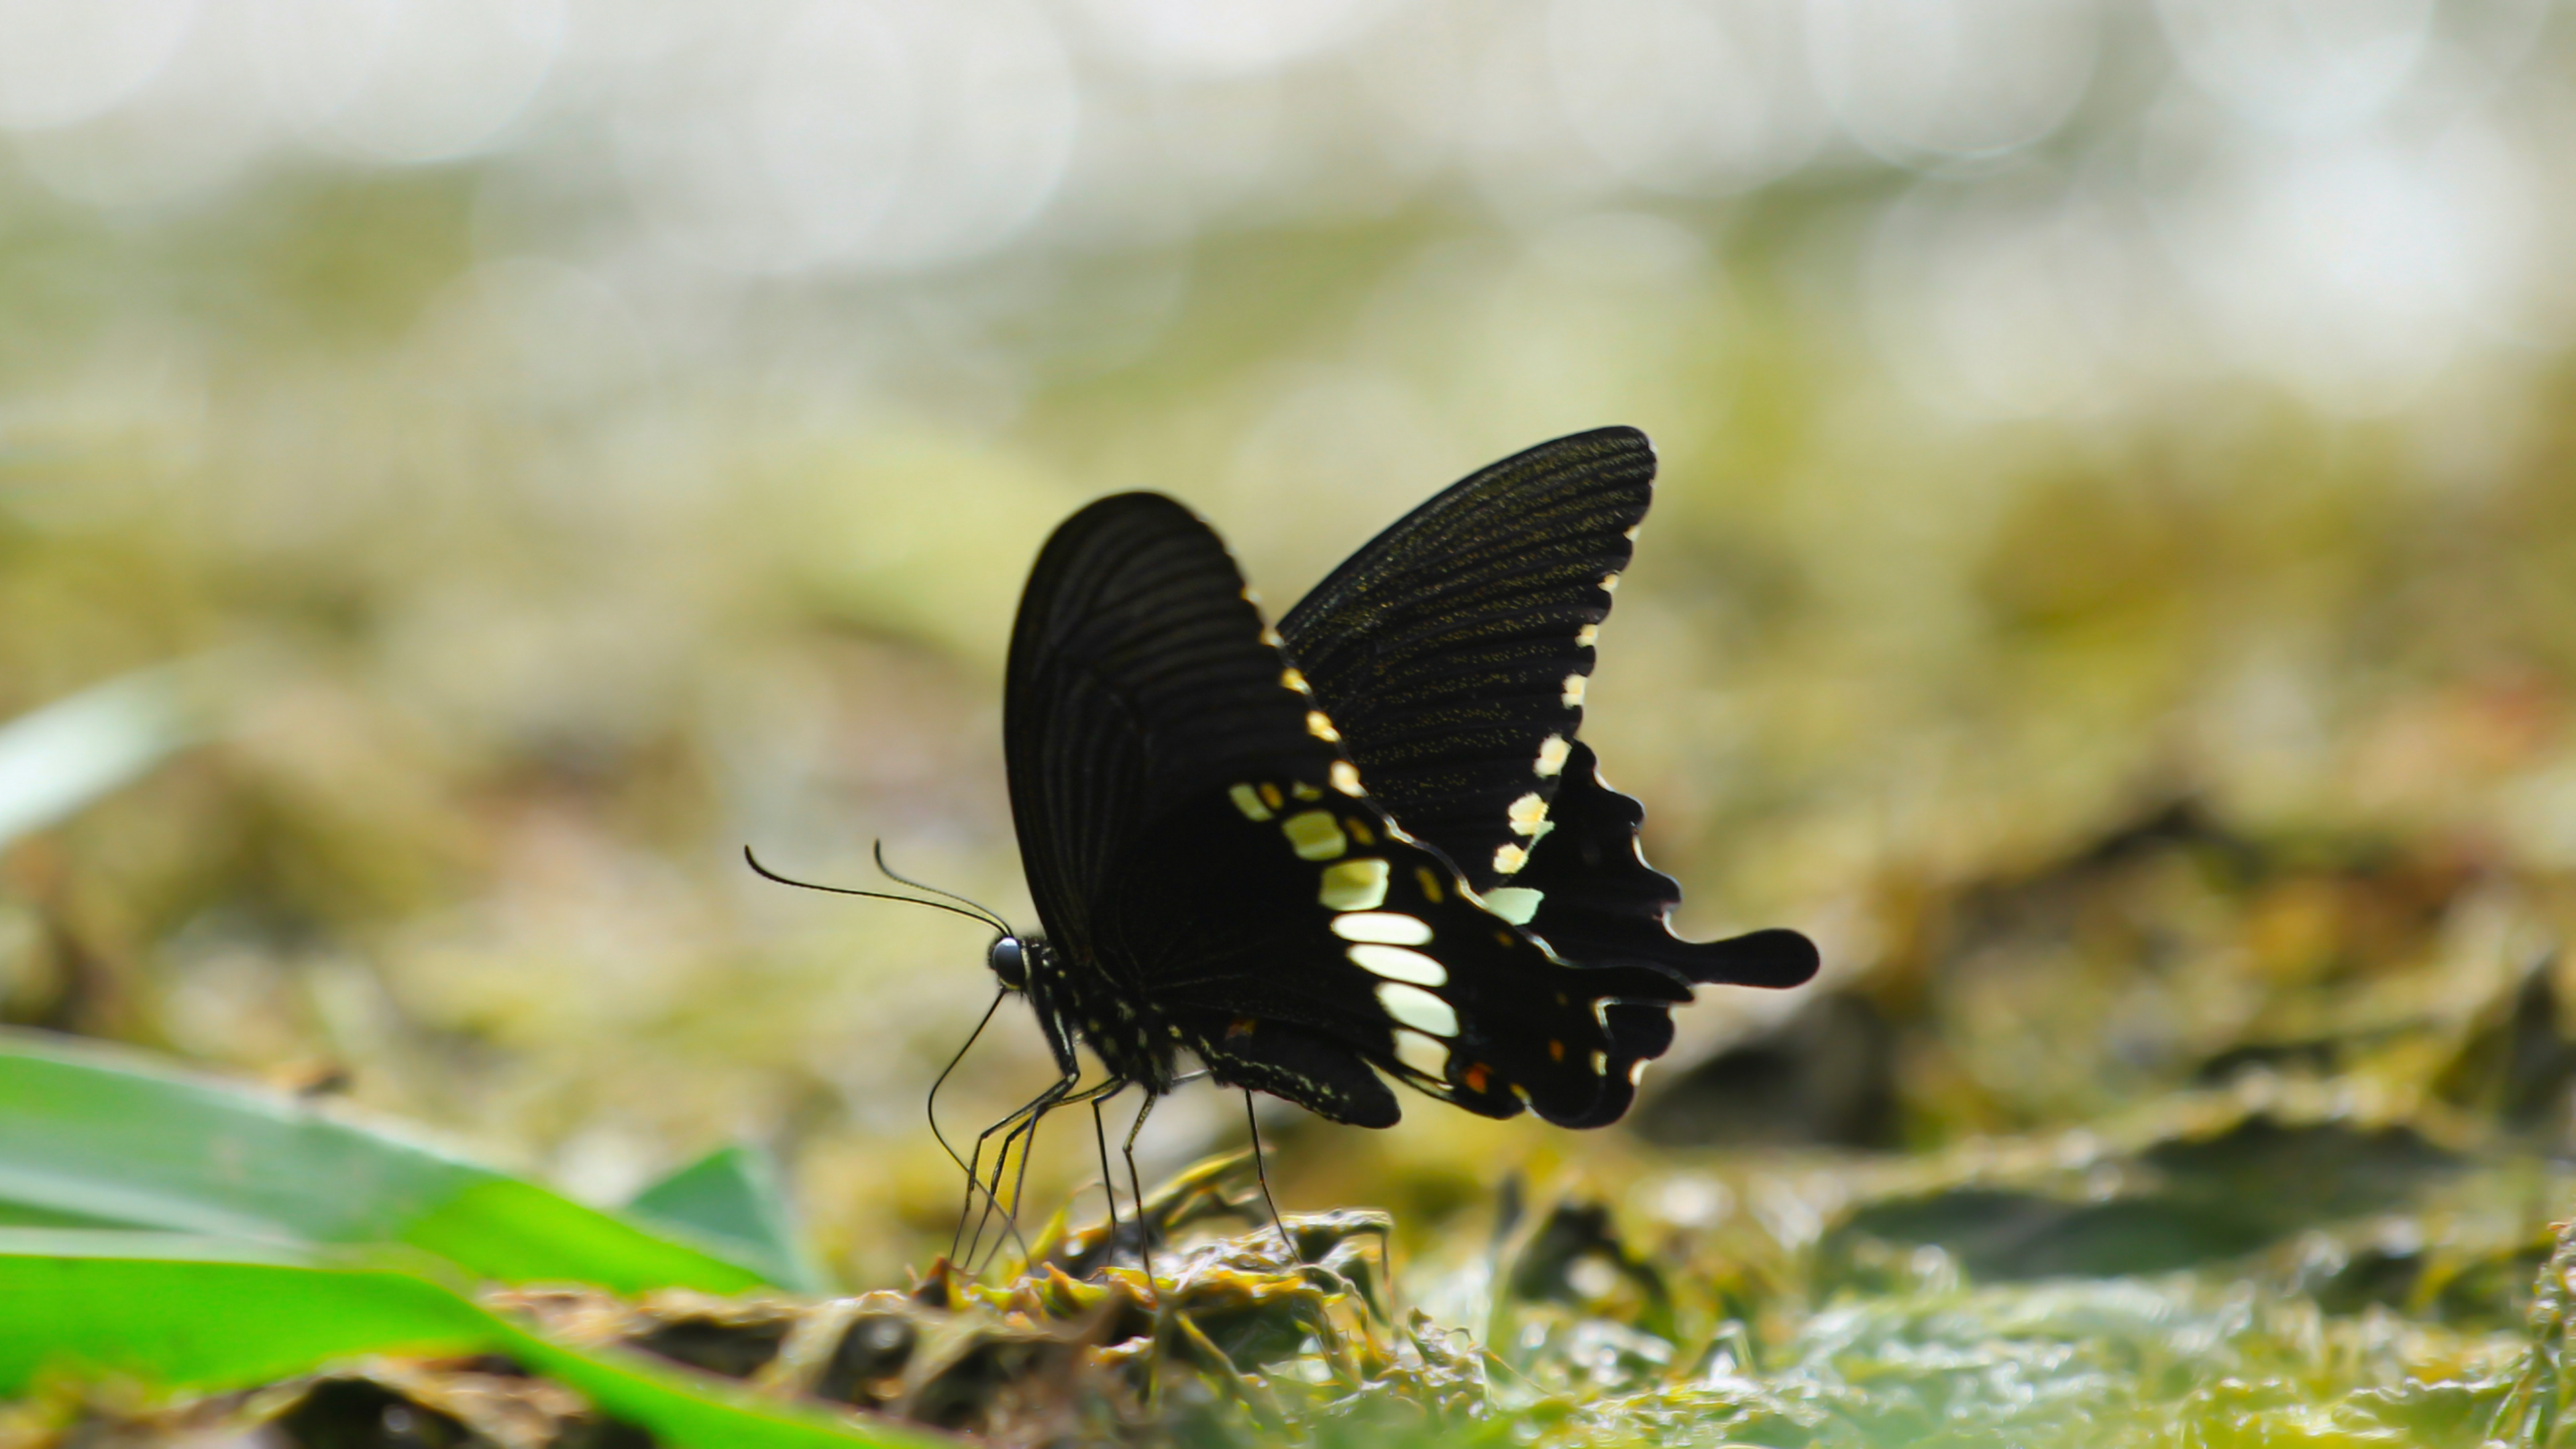 Black and White Butterfly on Green Grass During Daytime. Wallpaper in 3840x2160 Resolution